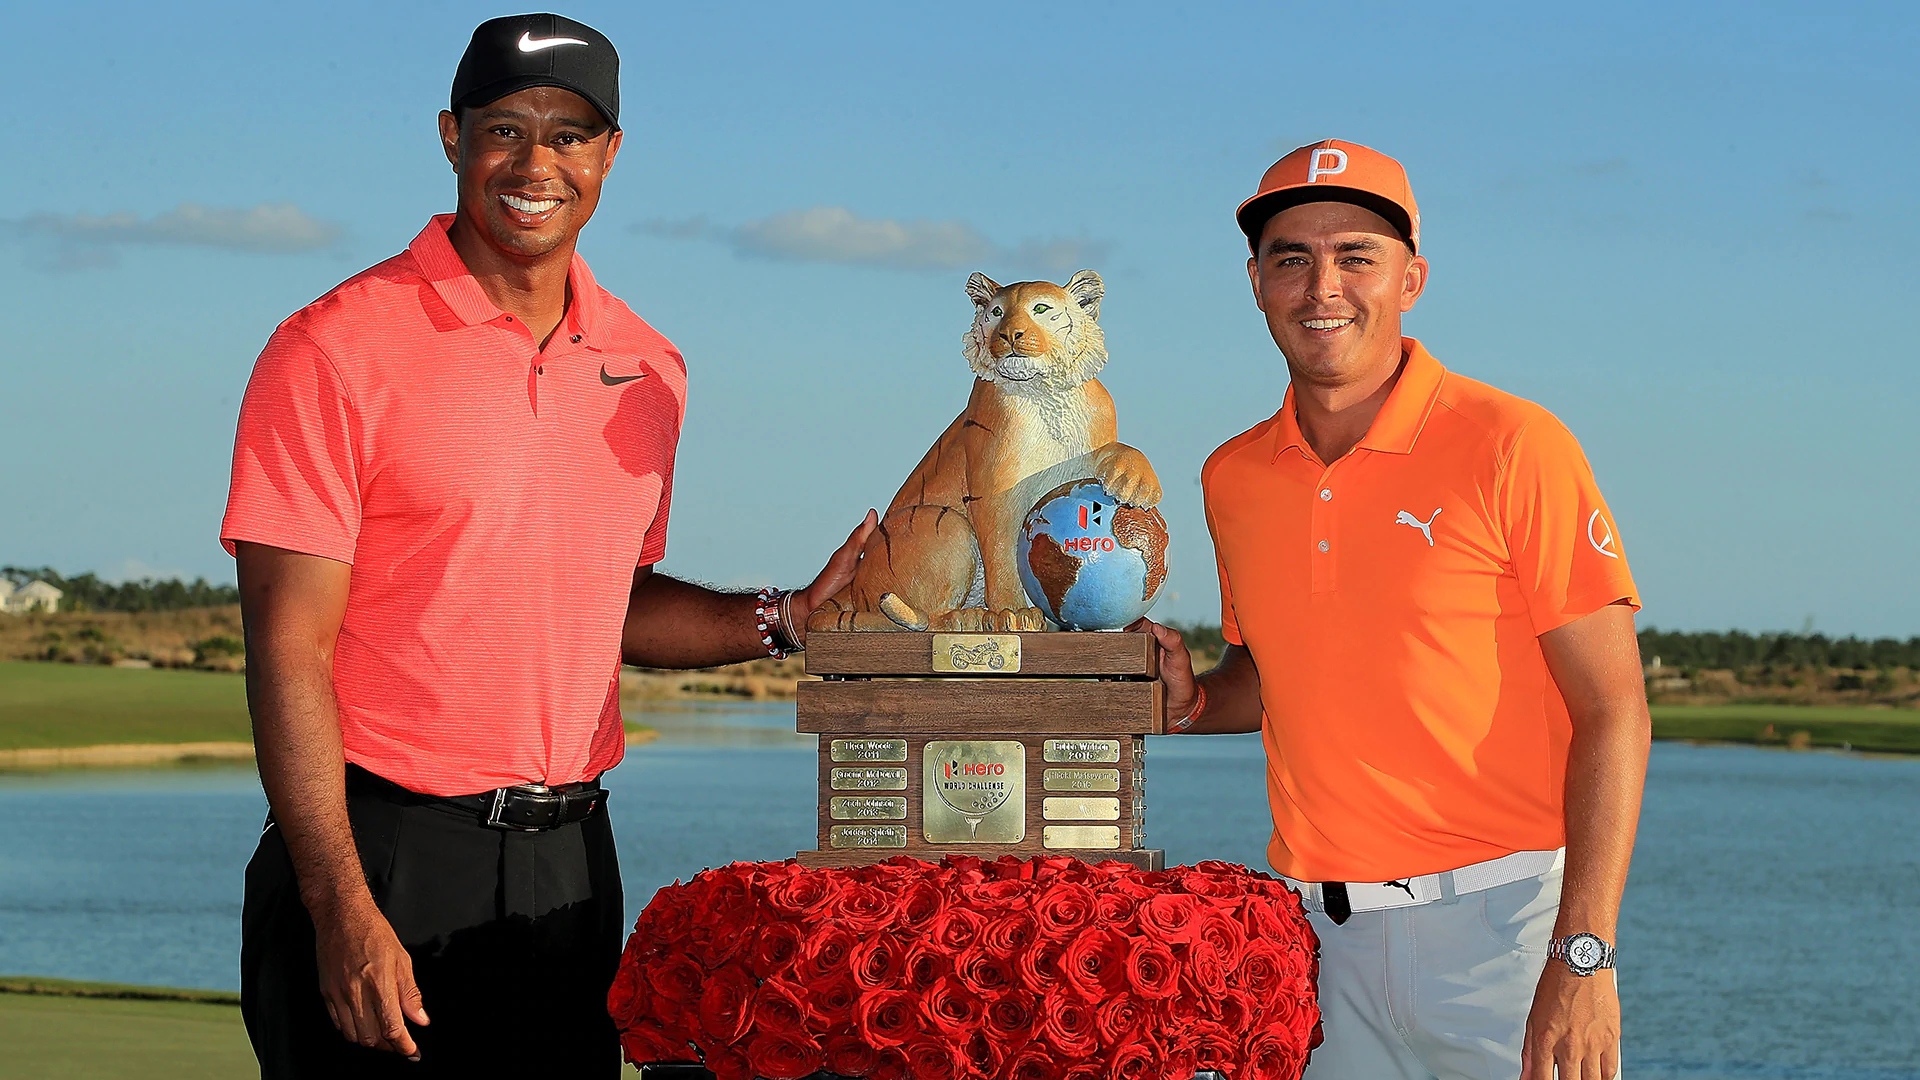 Fowler's 61 stole the attention from Tiger - for a bit